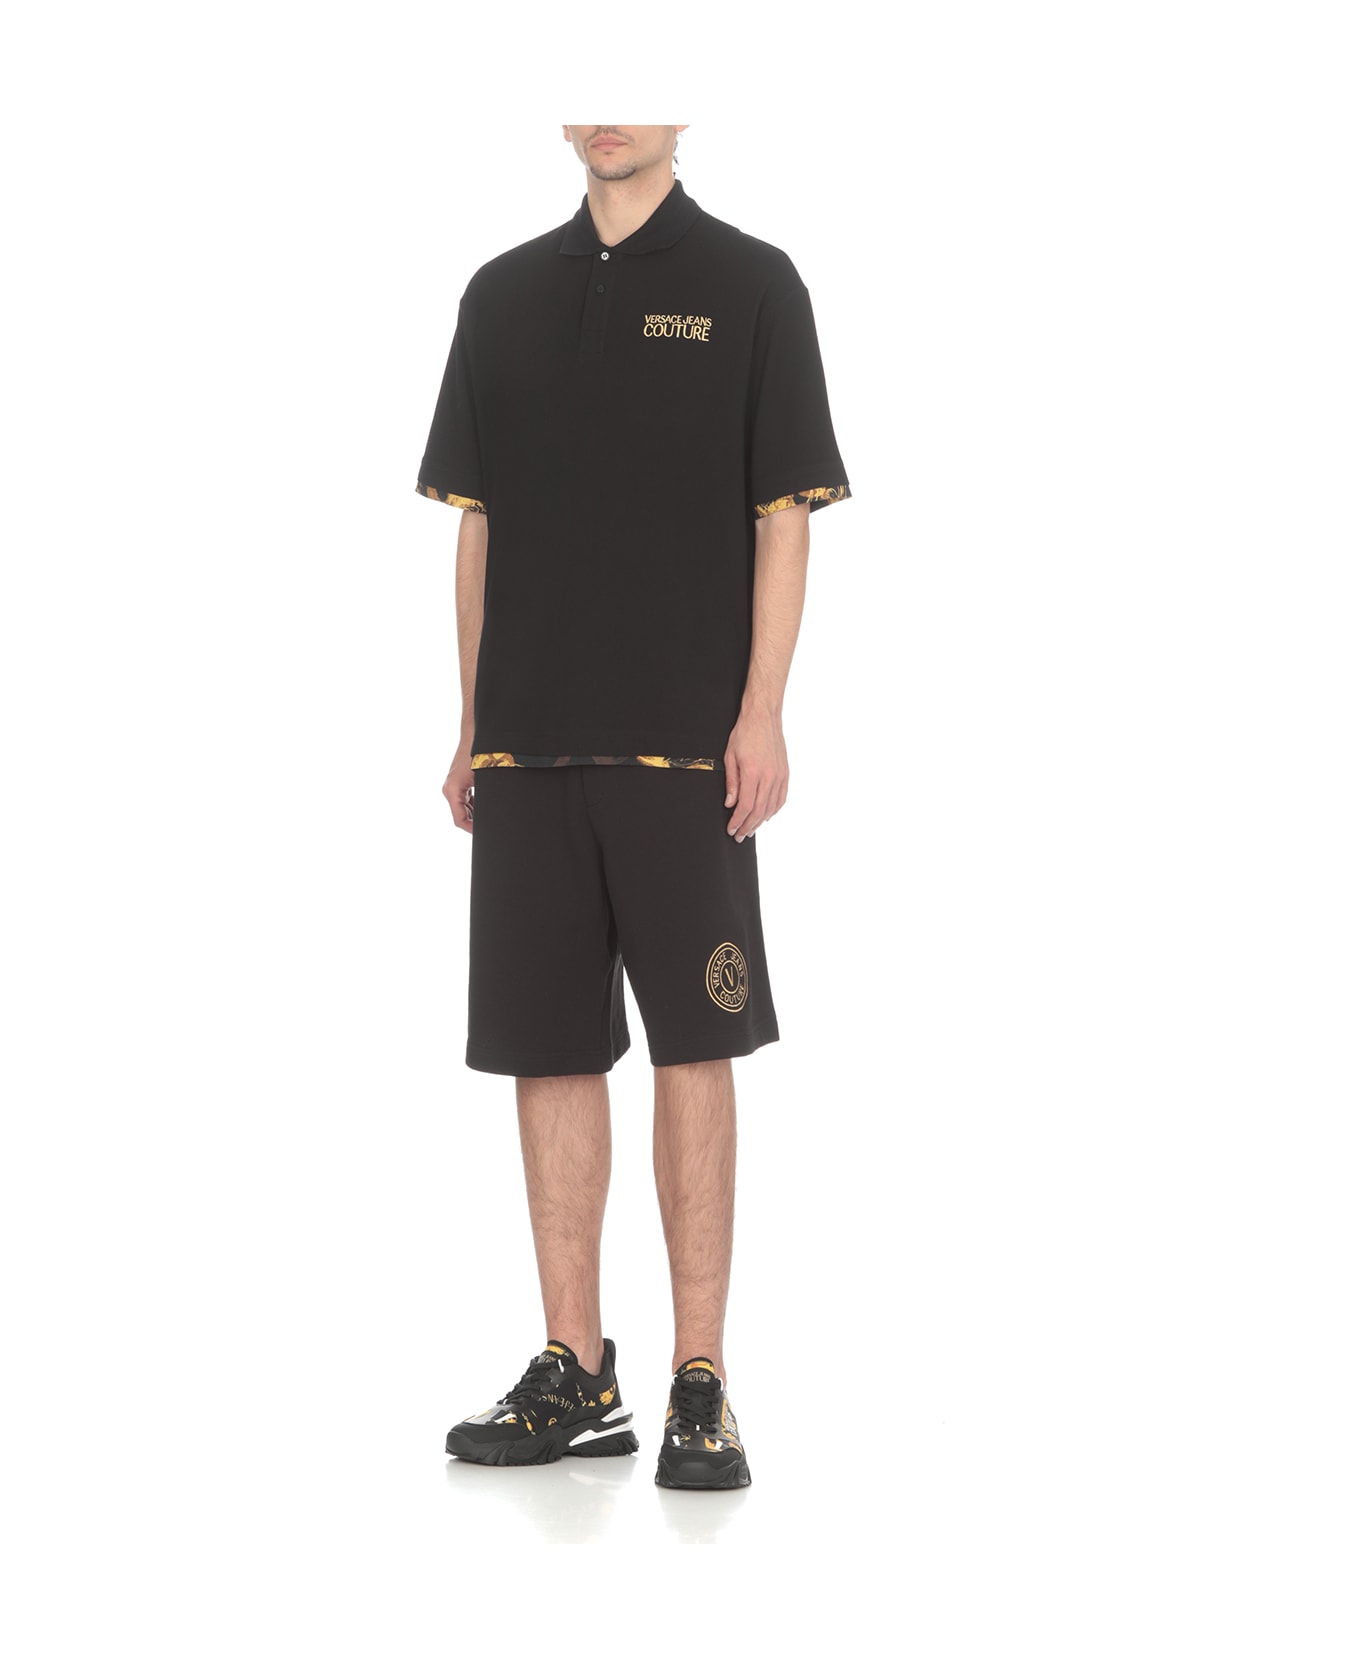 Versace Jeans Couture Polo Shirt With Baroque Details - Black ポロシャツ